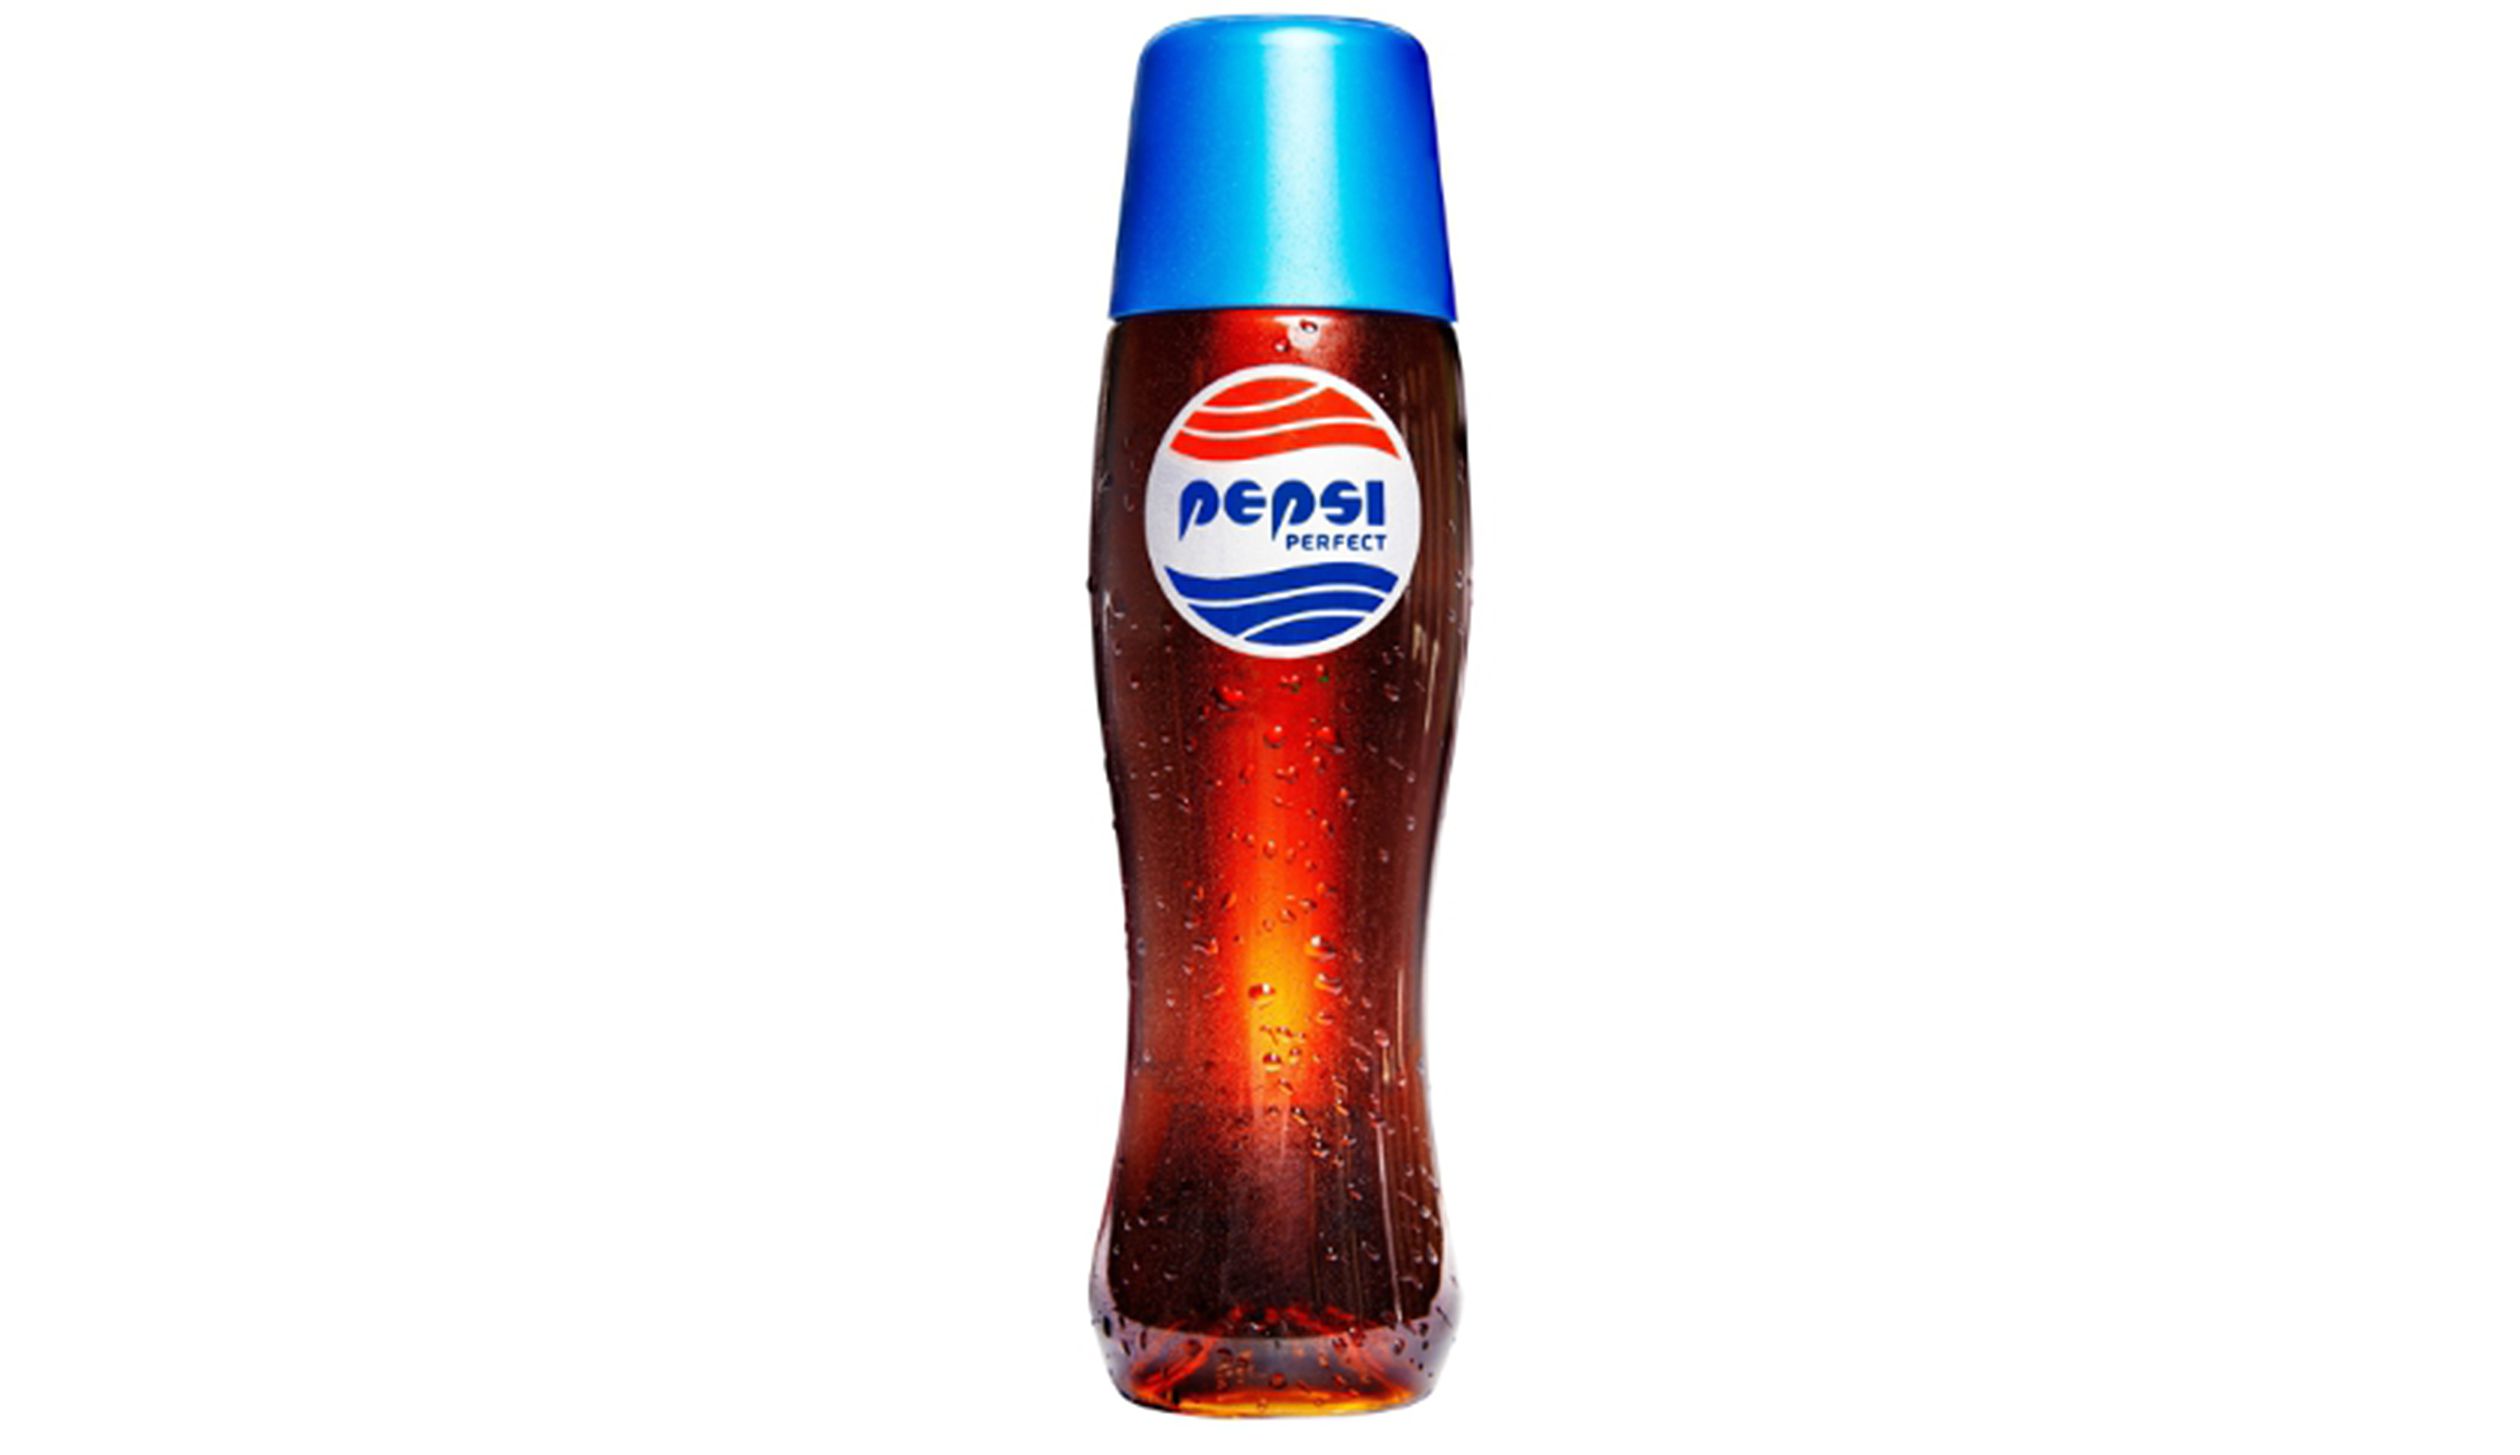 Great Scott they did it - Pepsi Perfect is here! Surprising fans everywhere, Pepsi officially confirms Pepsi Perfect - the famous soda Marty McFly orders in Back to the Future Part II. (PR NEWSWIRE&mdash;PR NEWSWIRE)